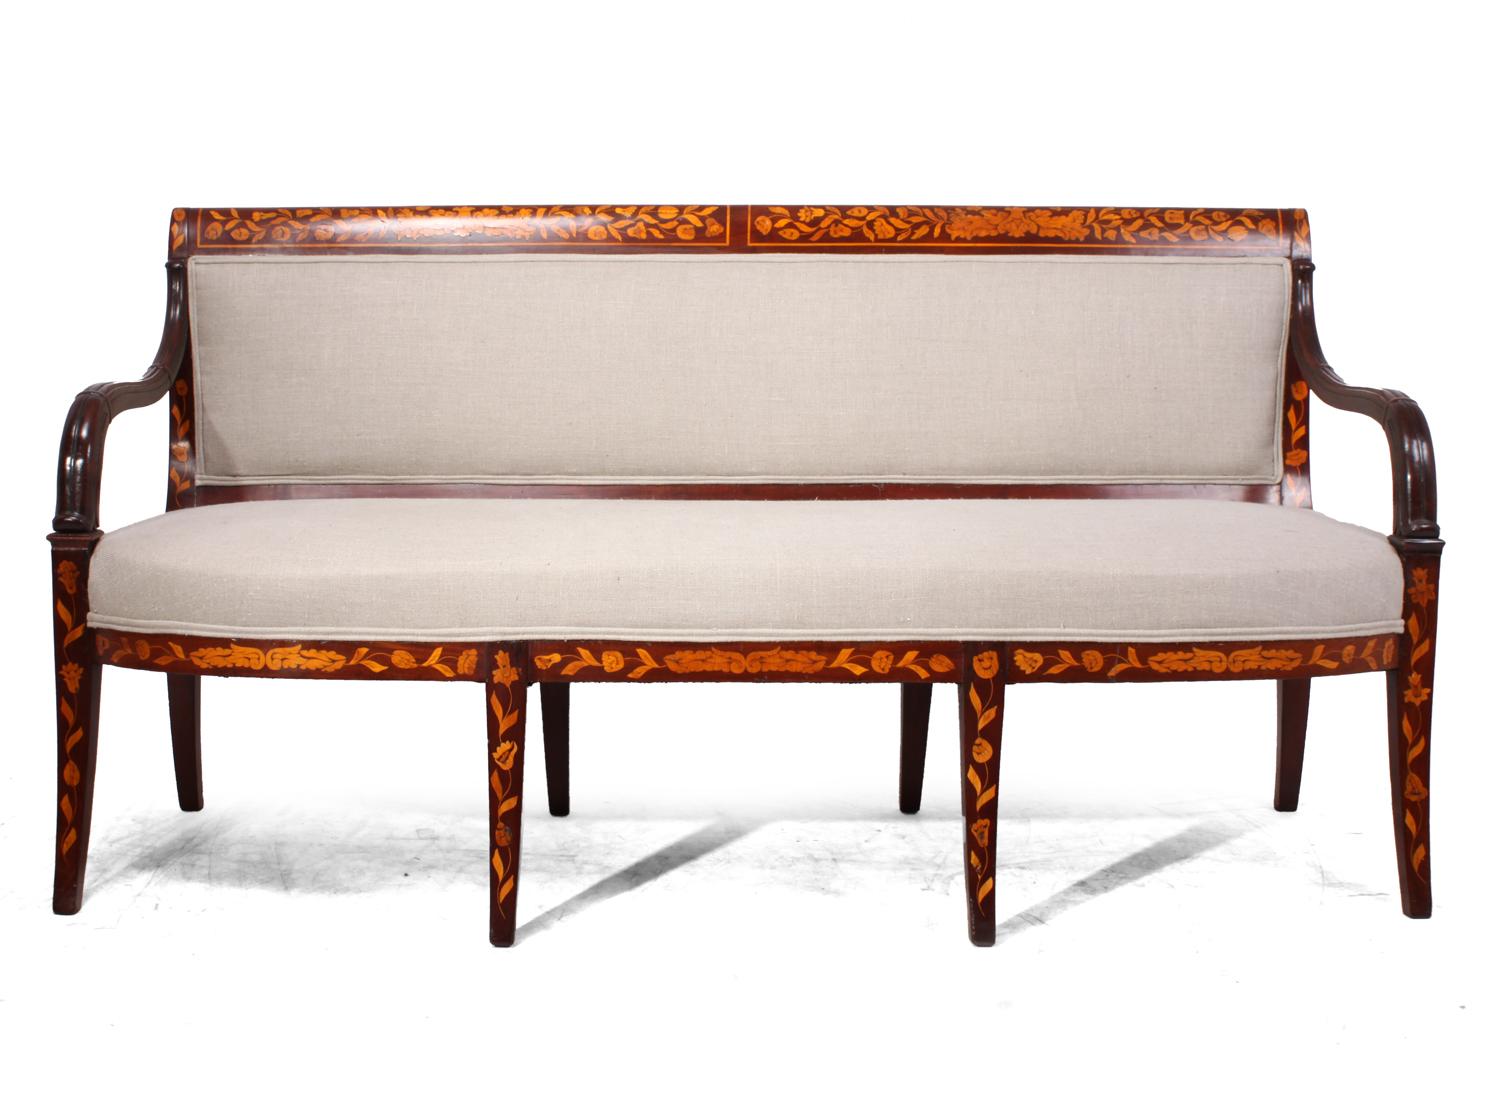 Antique Dutch mahogany marquetry sofa, circa 1840.
An Antique Dutch marquetry inlaid bench sofa, produced circa 1840 beautifully inlaid with garlands, the sofa has been fully restored and polished every joint is solid and strong, the sofa has also